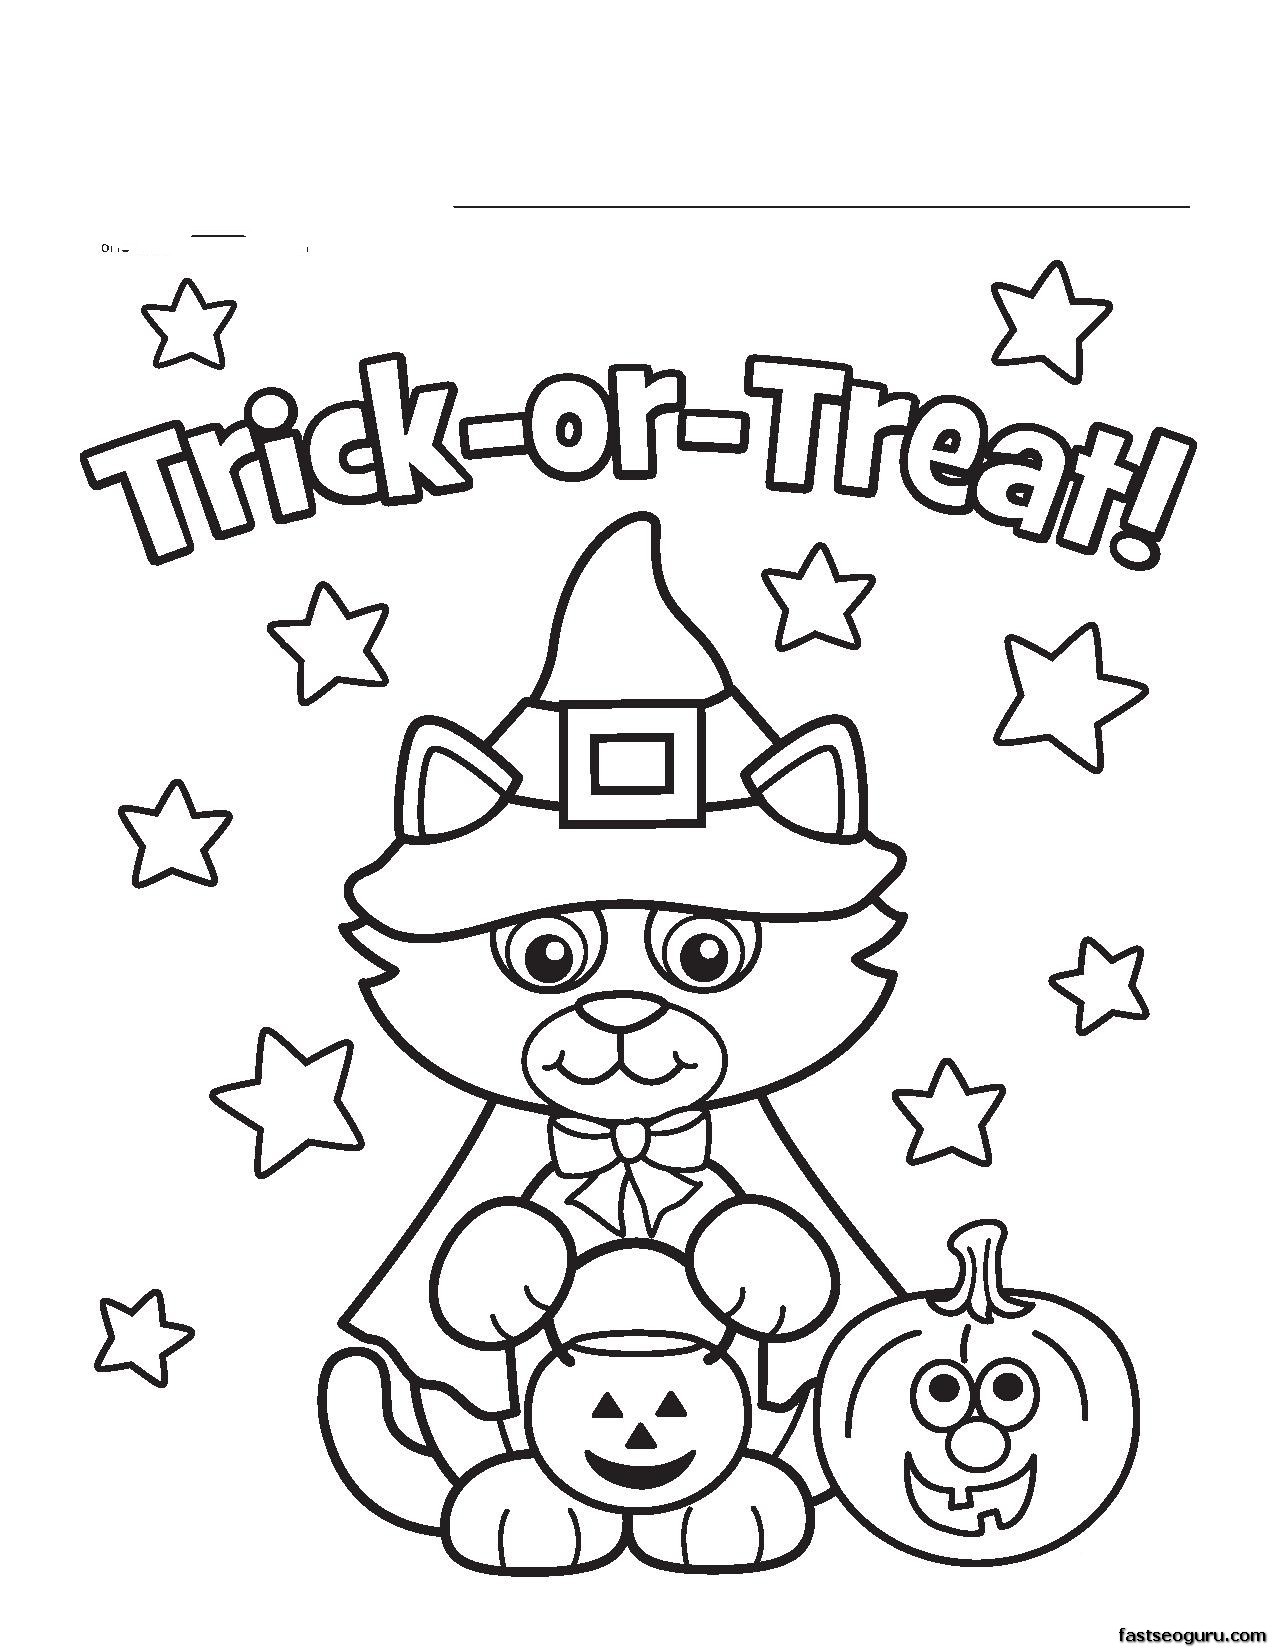 Halloween Coloring Pages For Toddlers at GetColorings.com   Free ...